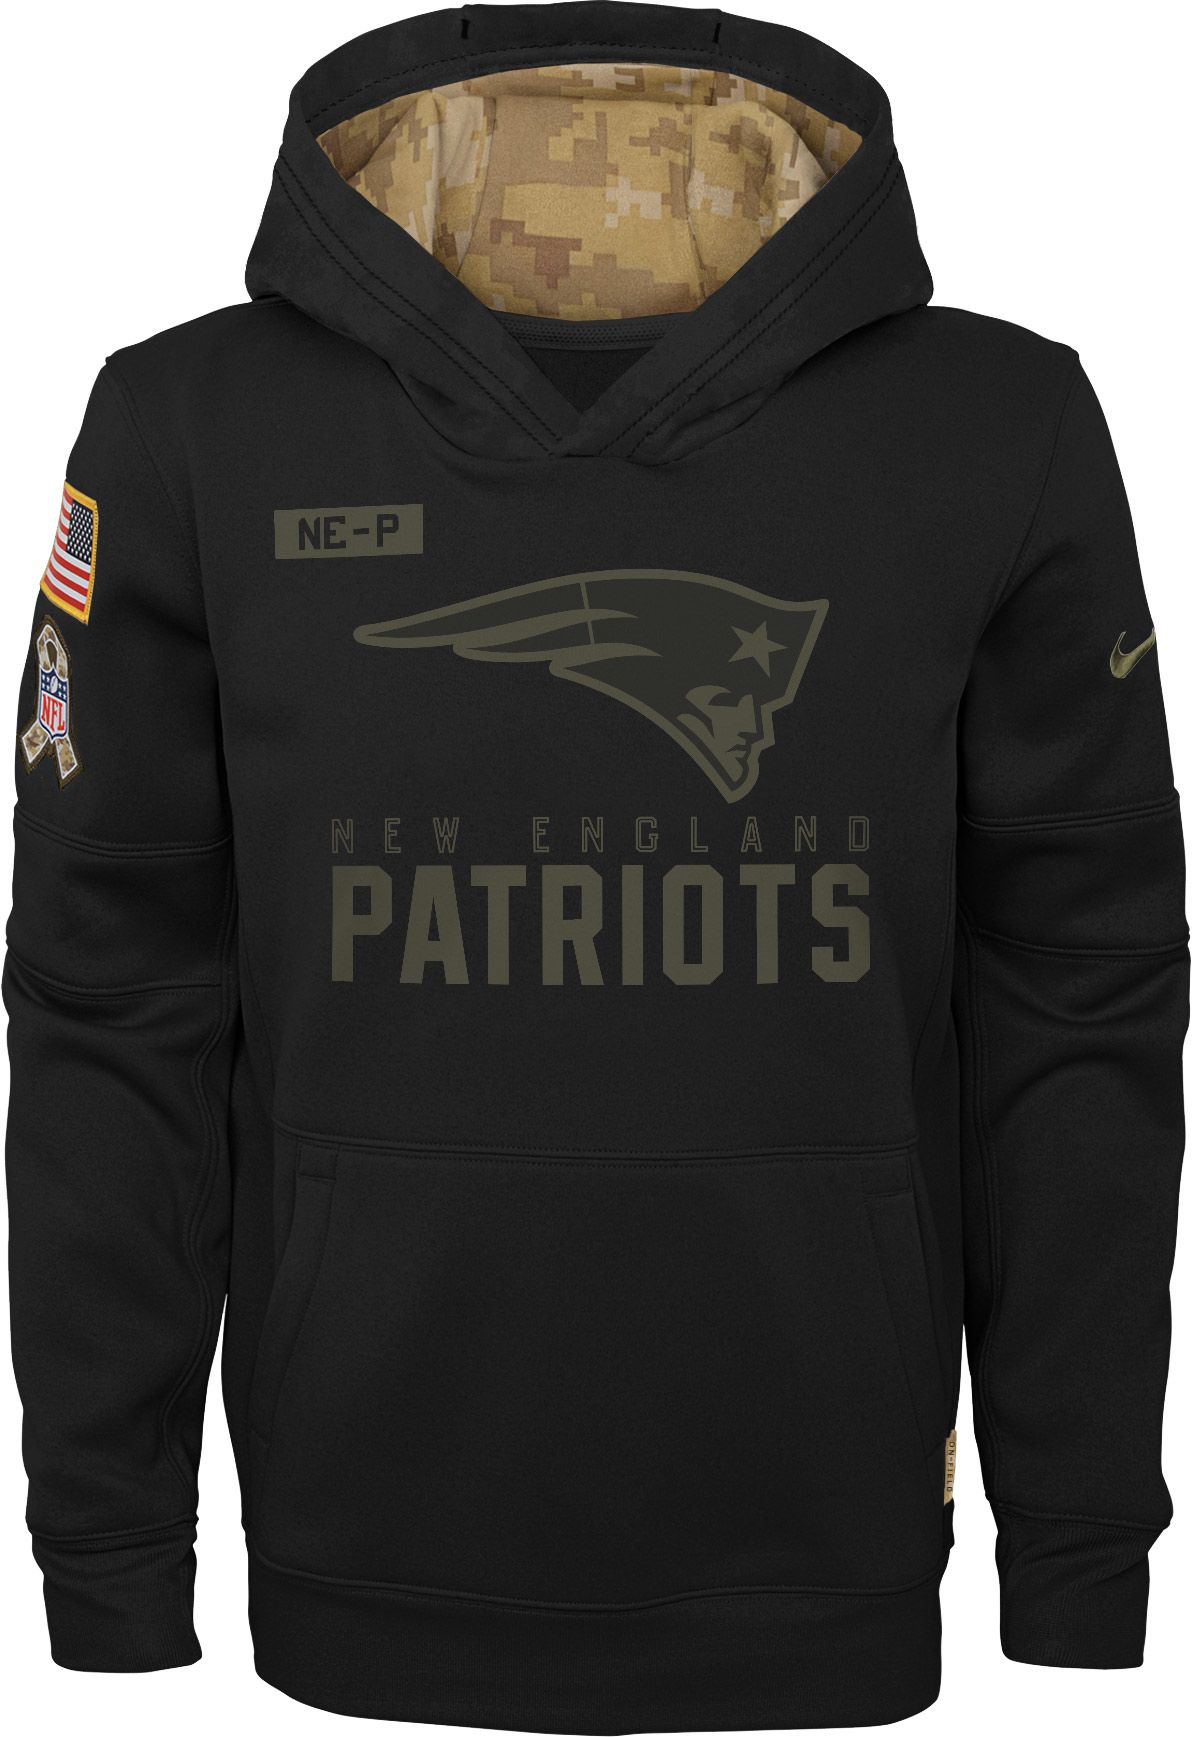 nfl salute to service eagles hoodie